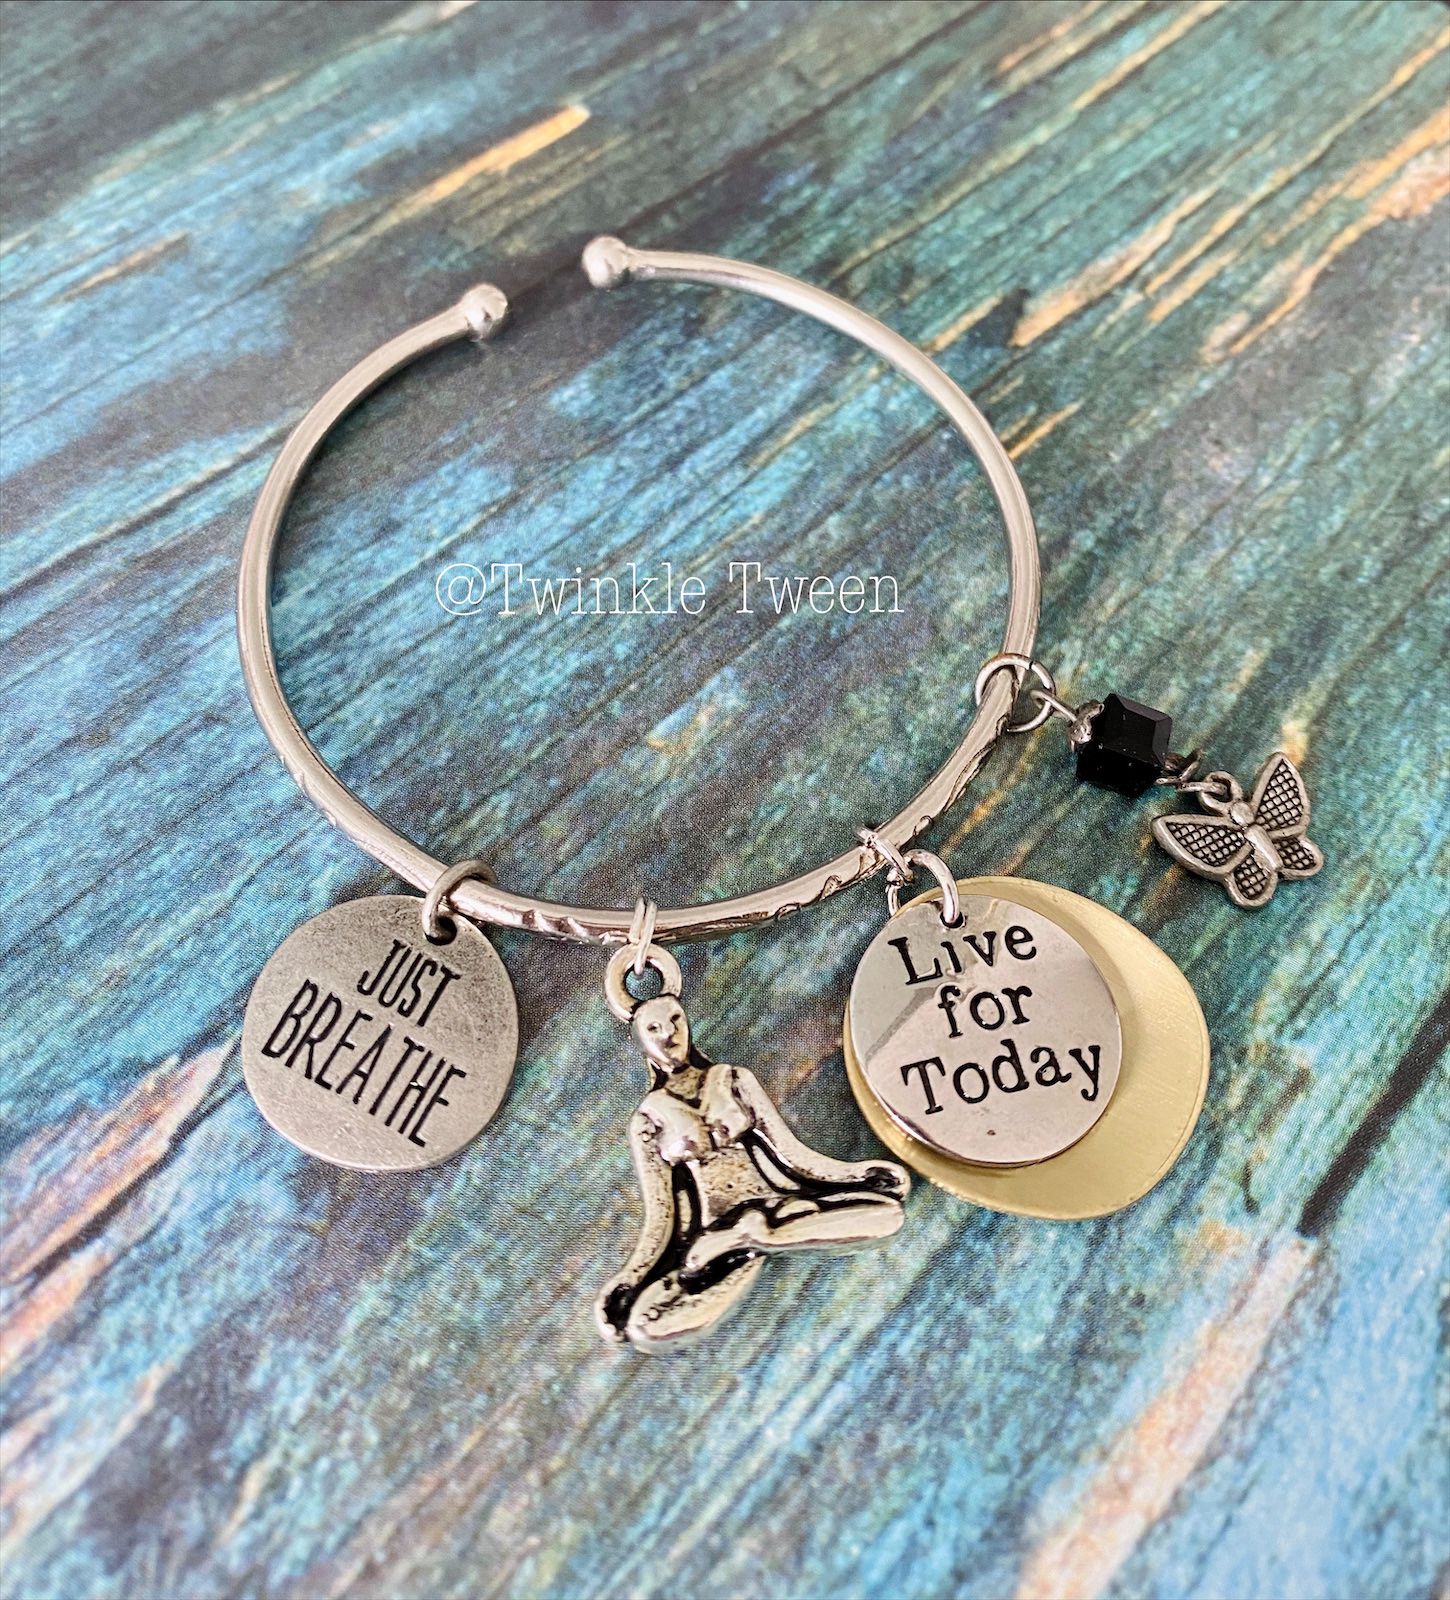 New Metal Bangle with Yoga Relaxing Charms